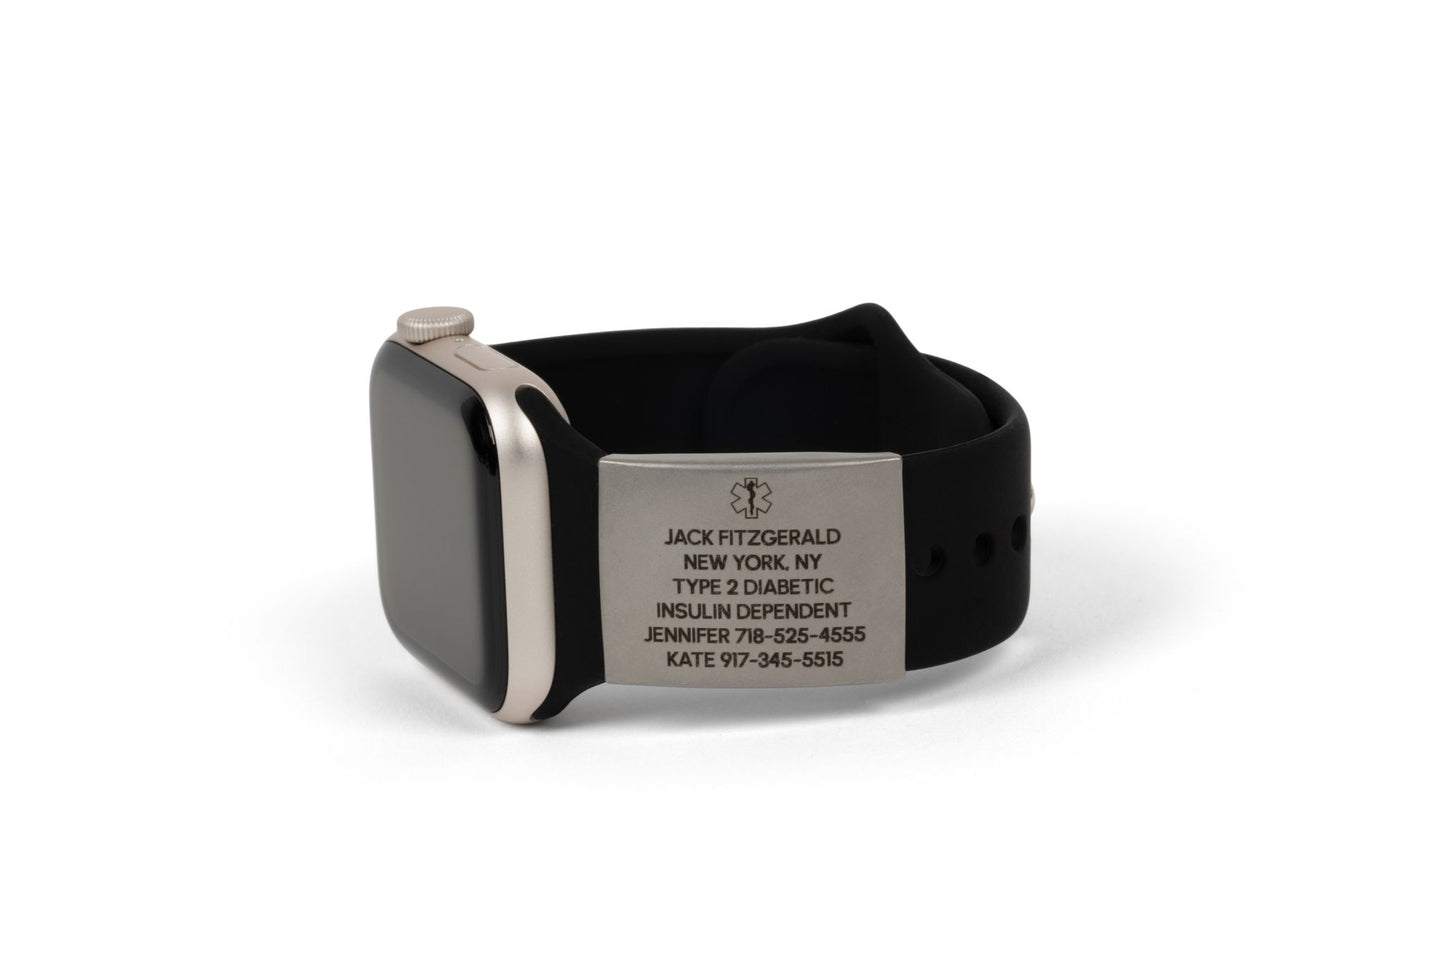 Custom Stainless Steel Medical ID Tag - Waterproof, Fits Watch Bands I Personalize with 6 Lines of Text